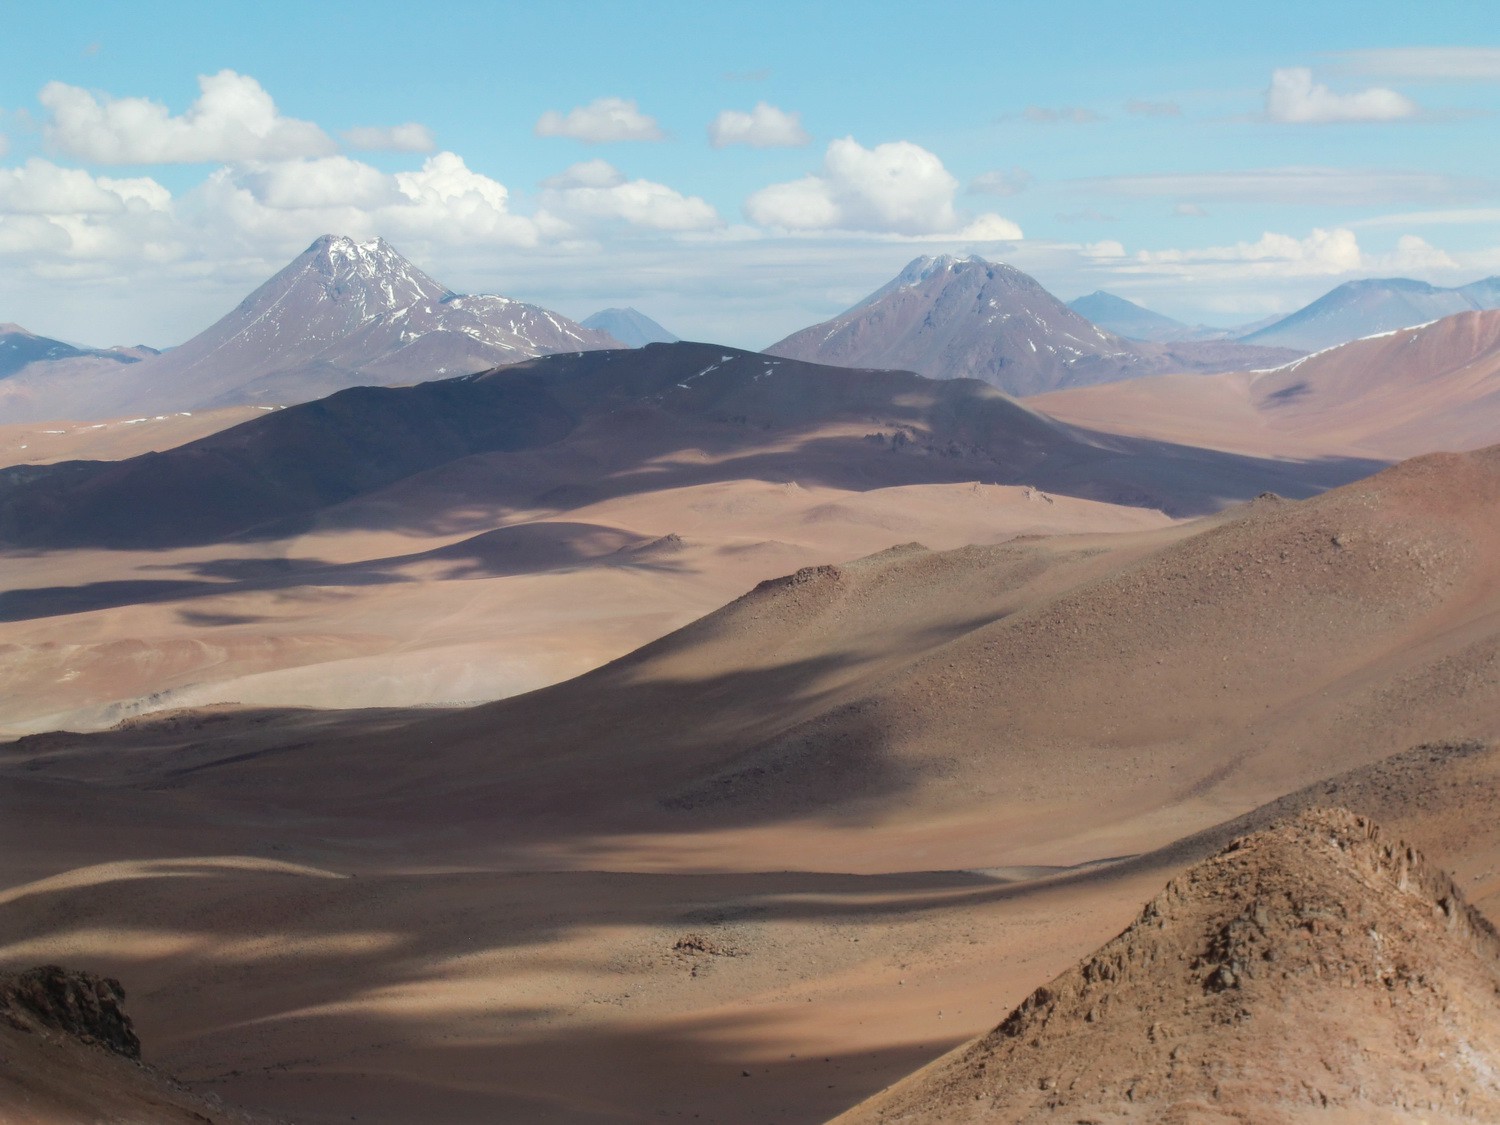 The Volcanoes Pili and Aguas Caliente